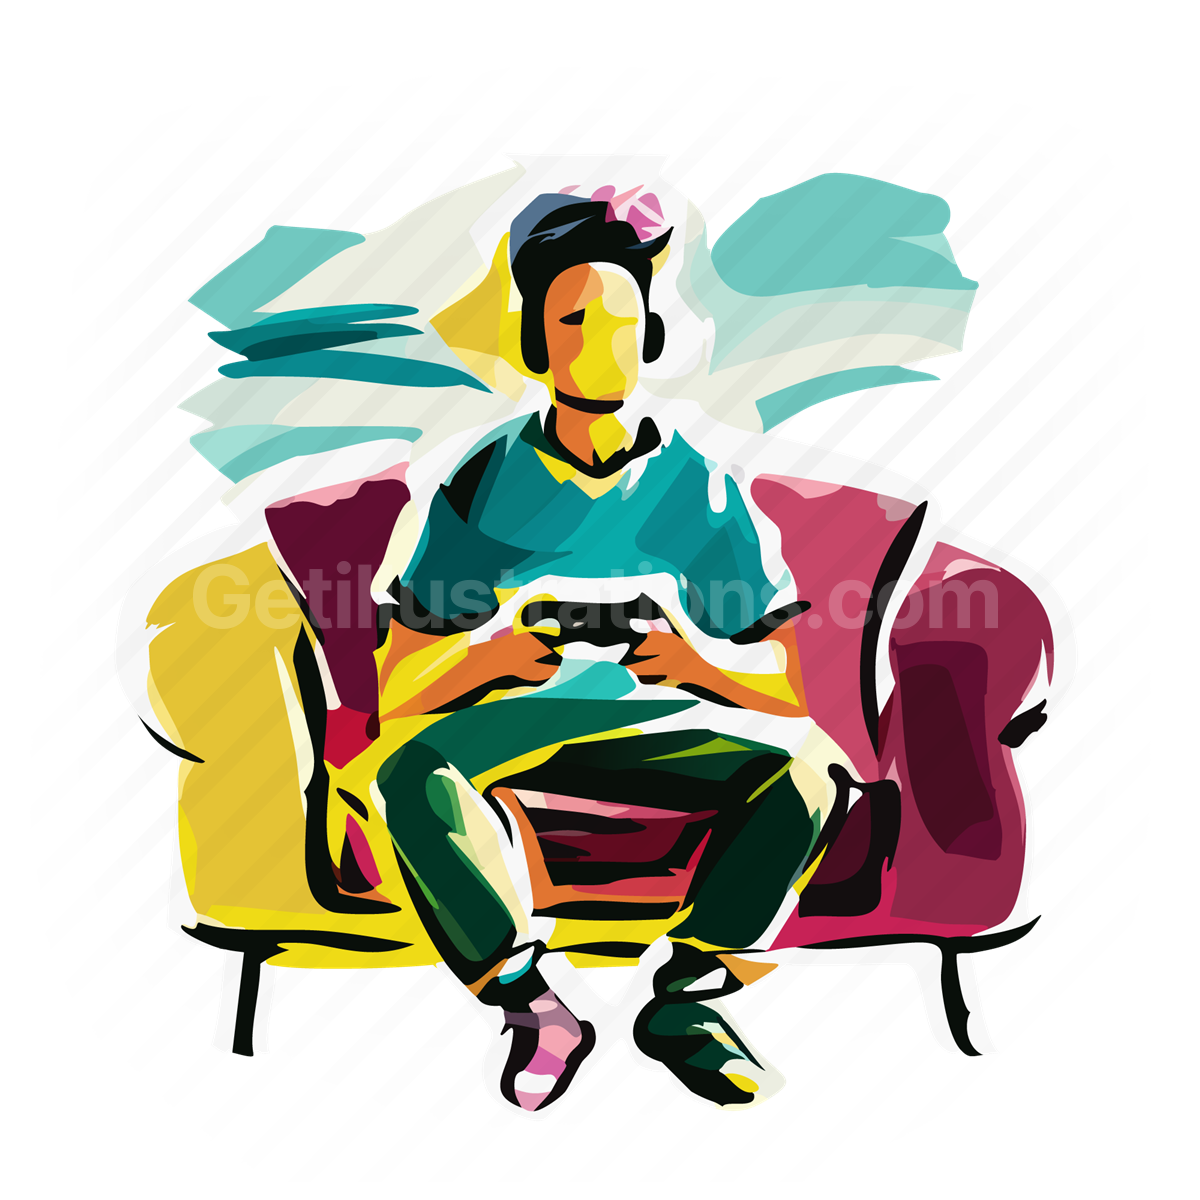 gaming, video game, man, people, person, chair, sofa, couch, furniture, furnishing